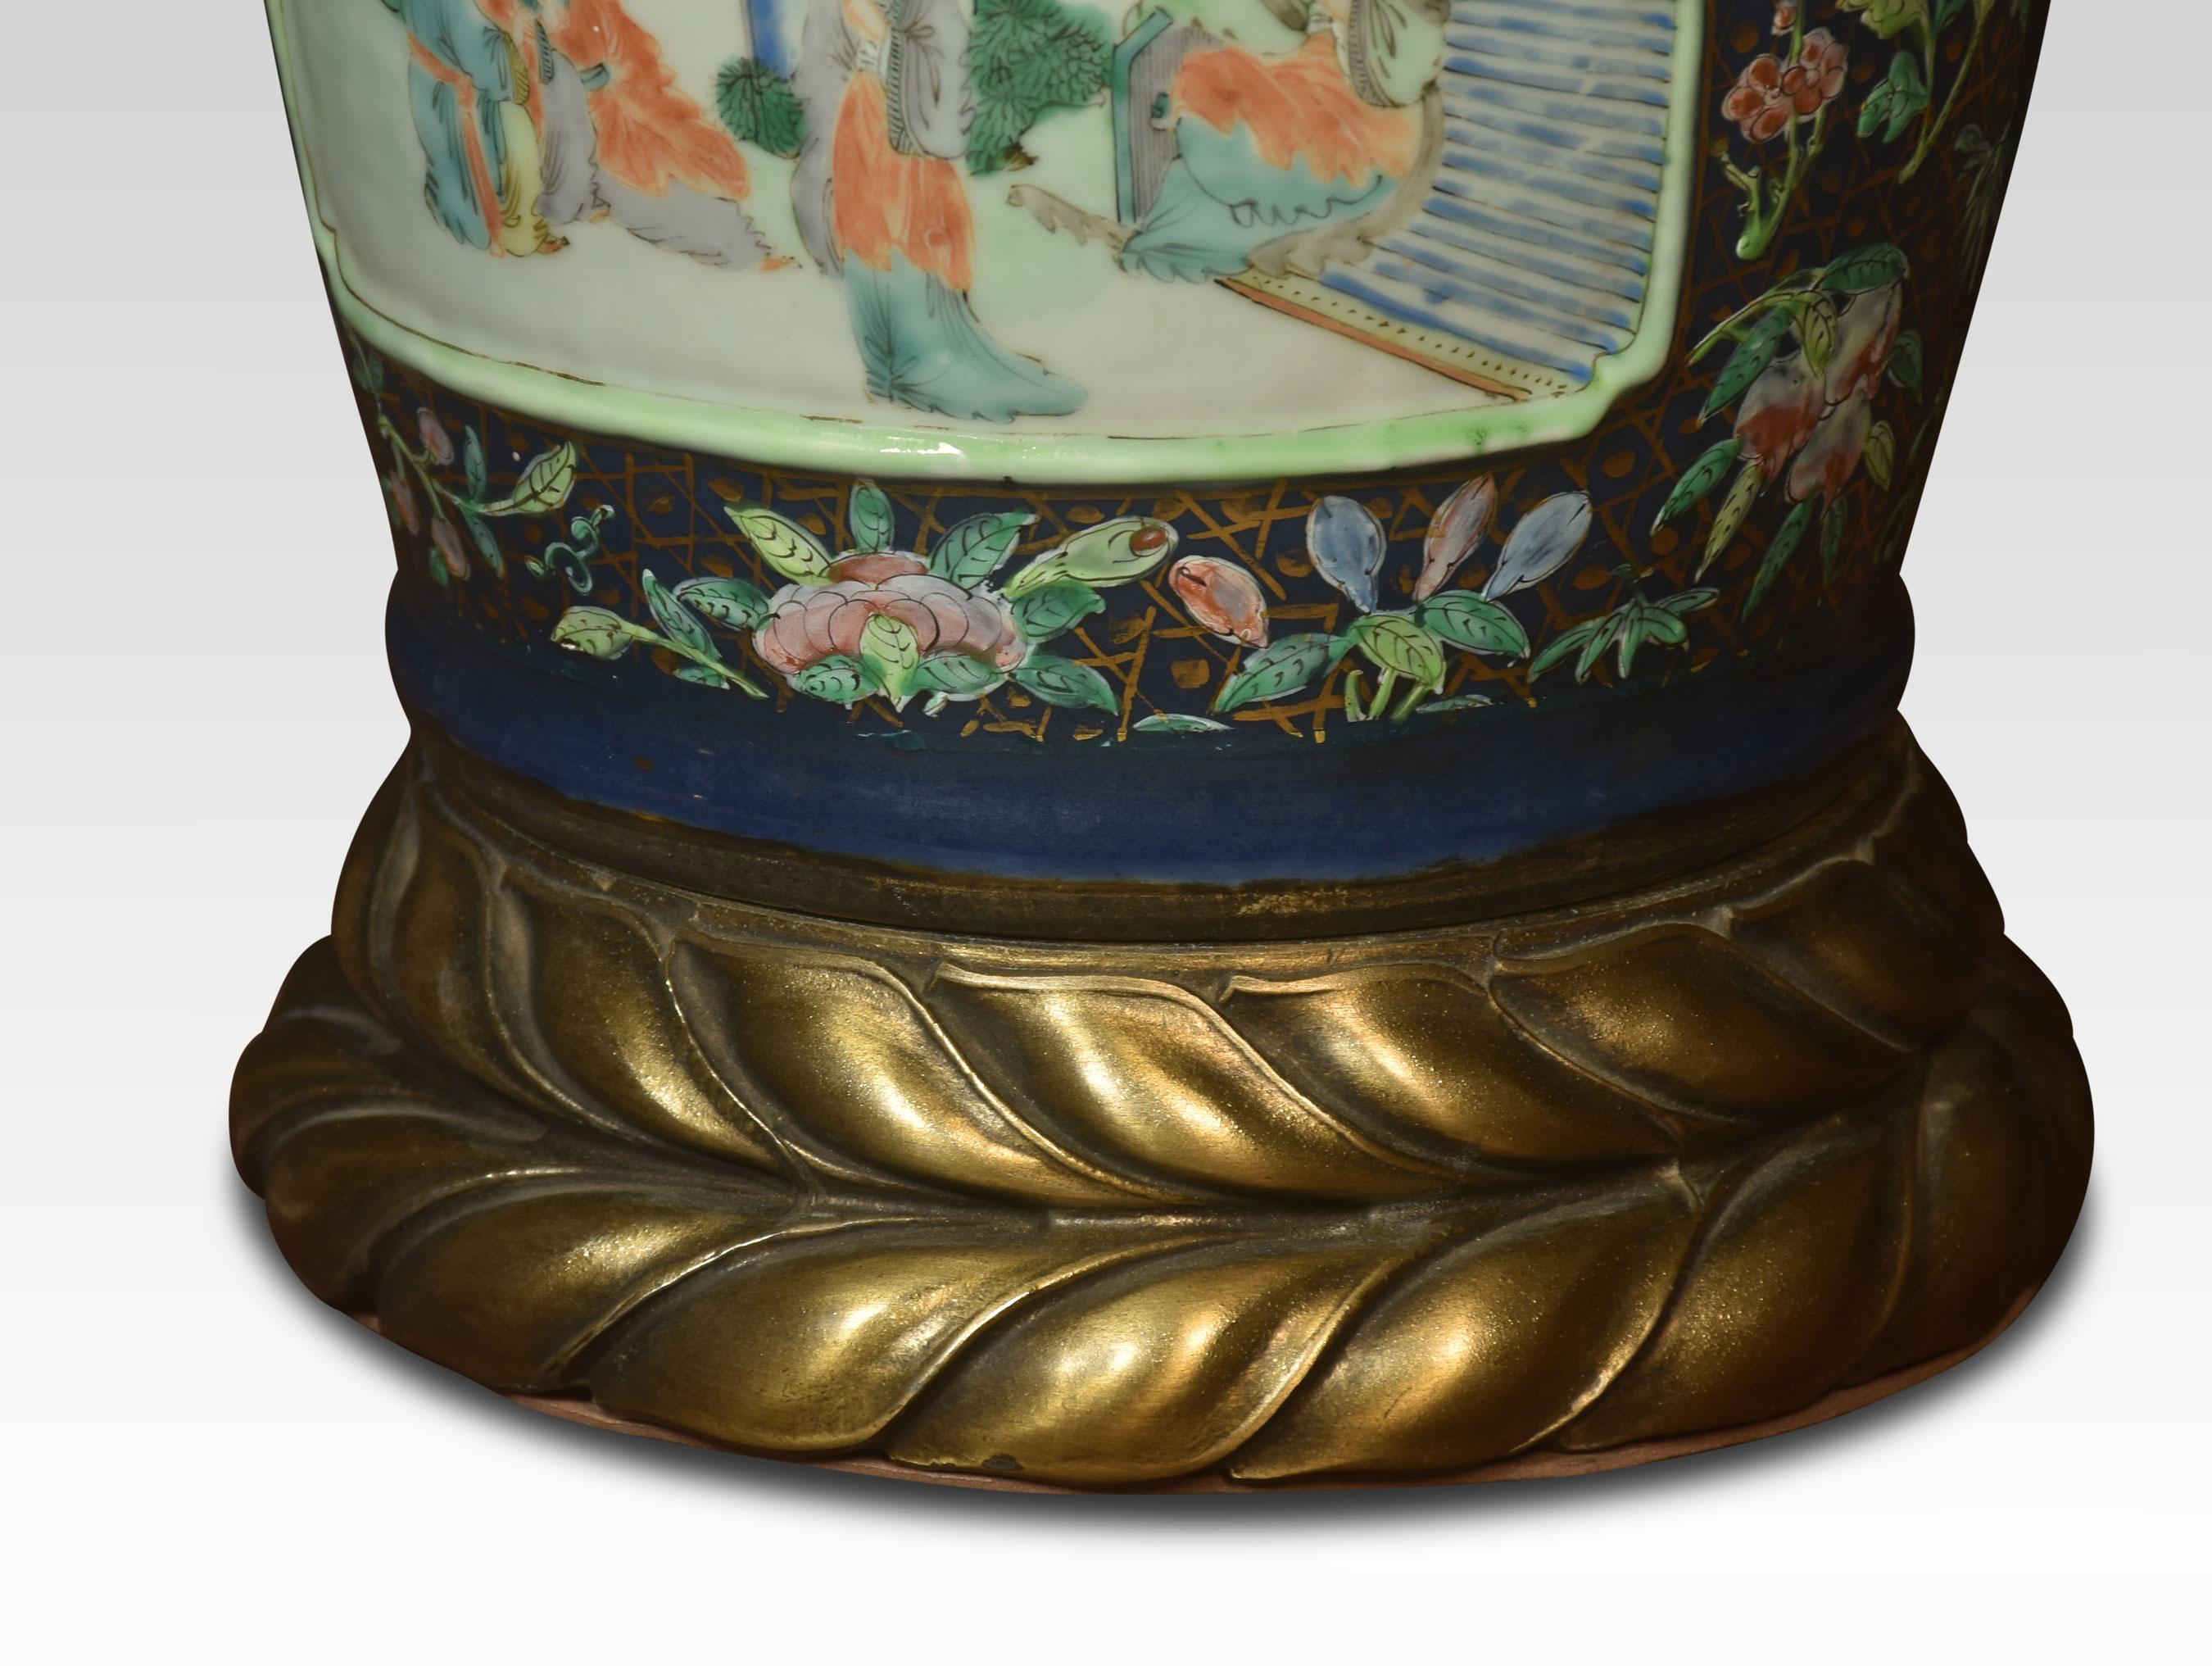 Chinese Porcelain Famille Verte Vase mounted as a lamp depicting an Islamic market, raised up on turned base.
Dimensions
height 22 Inches
width 8 Inches
depth 8 Inches